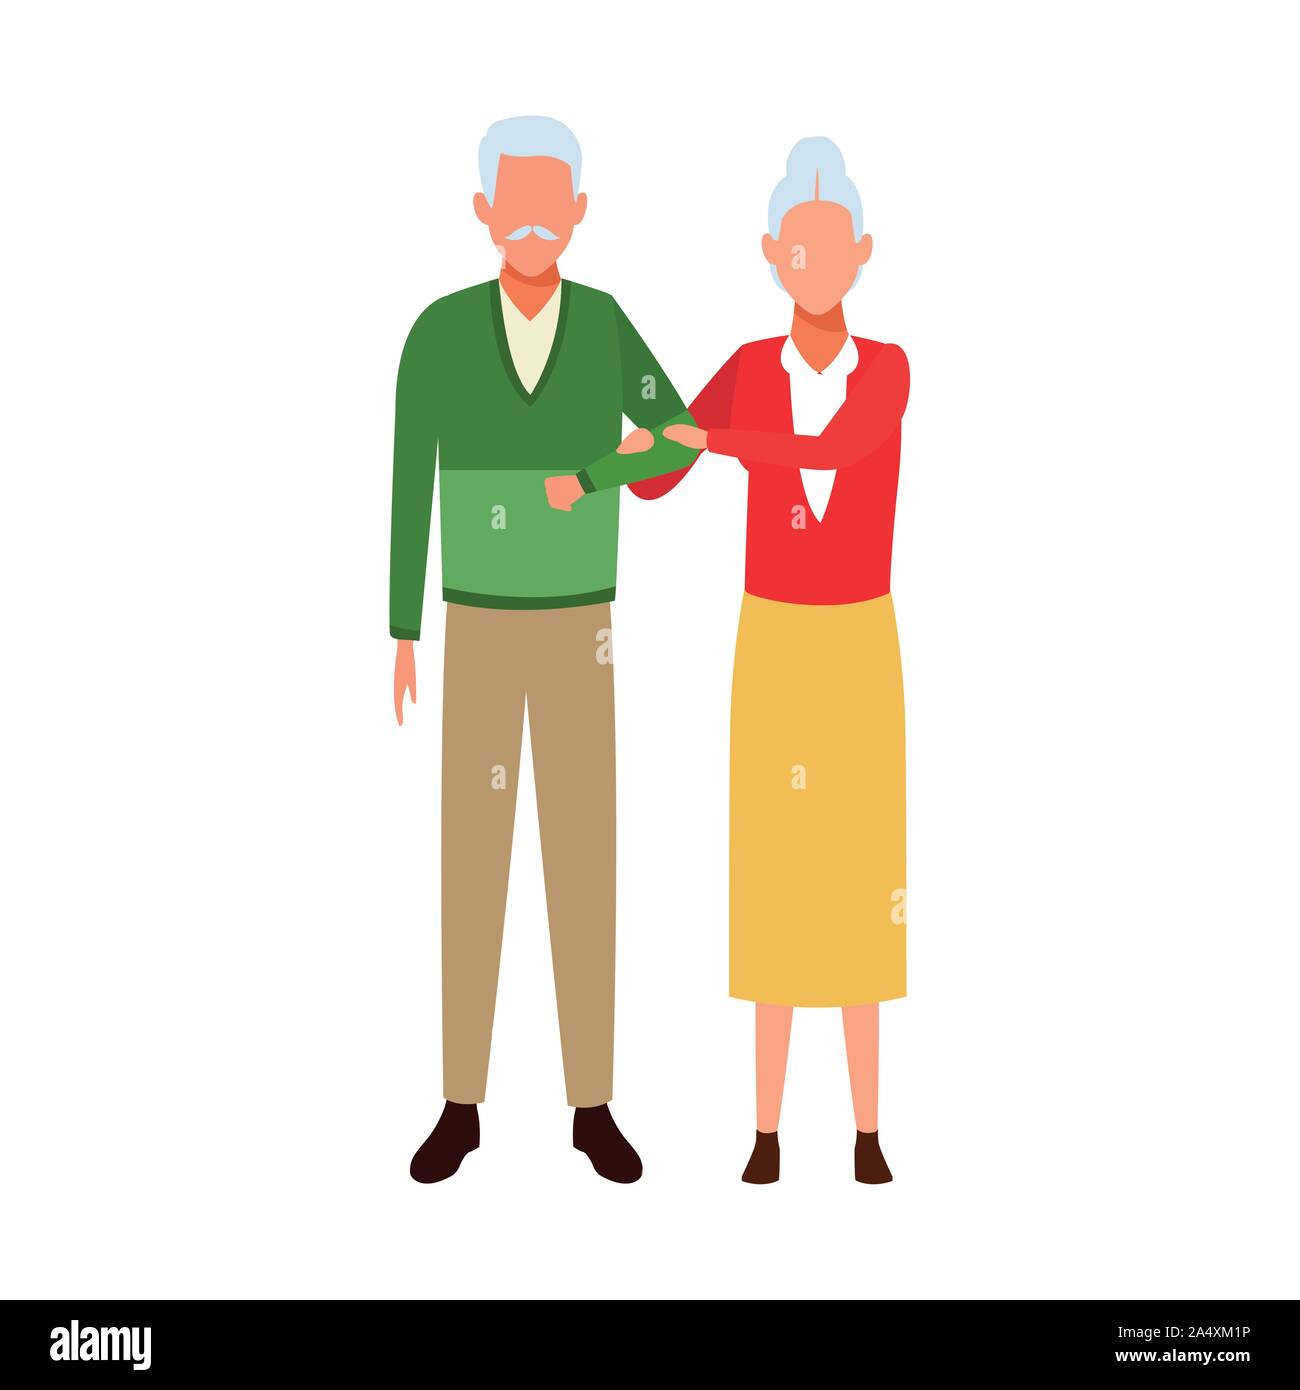 avatar old couple icon image Stock Vector